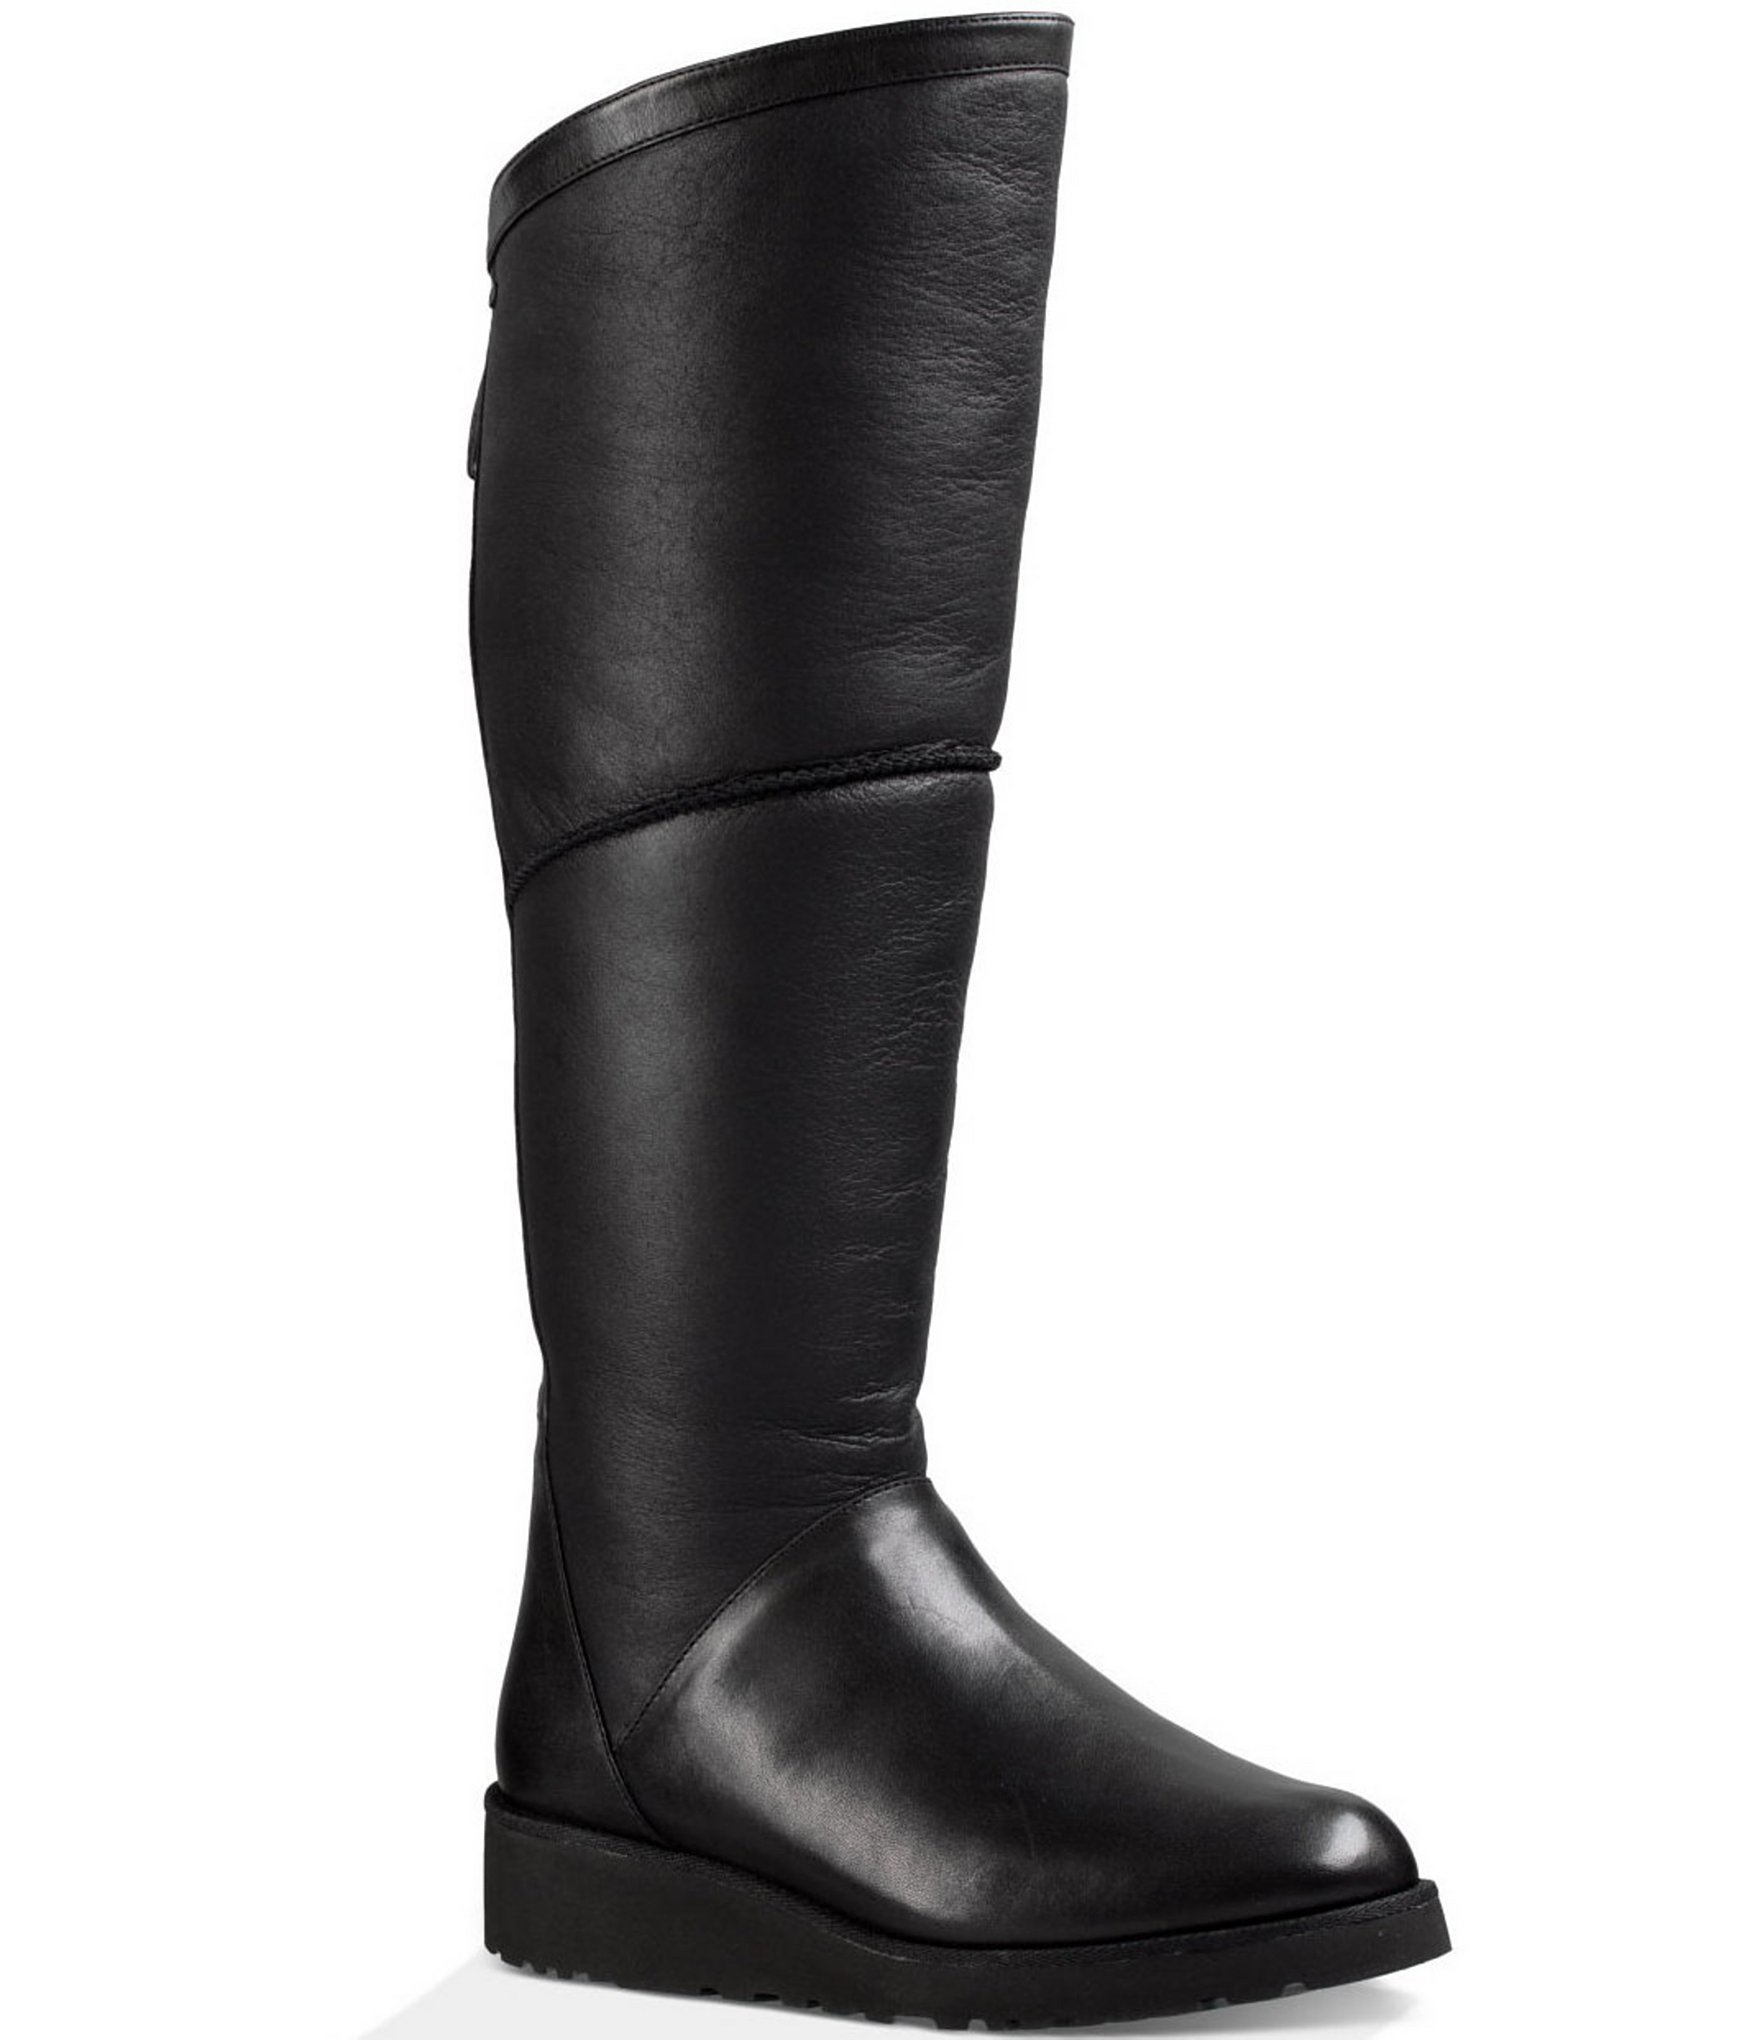 Lyst - Ugg Kendi Sheepskin And Leather Wedge Tall Boots in Black